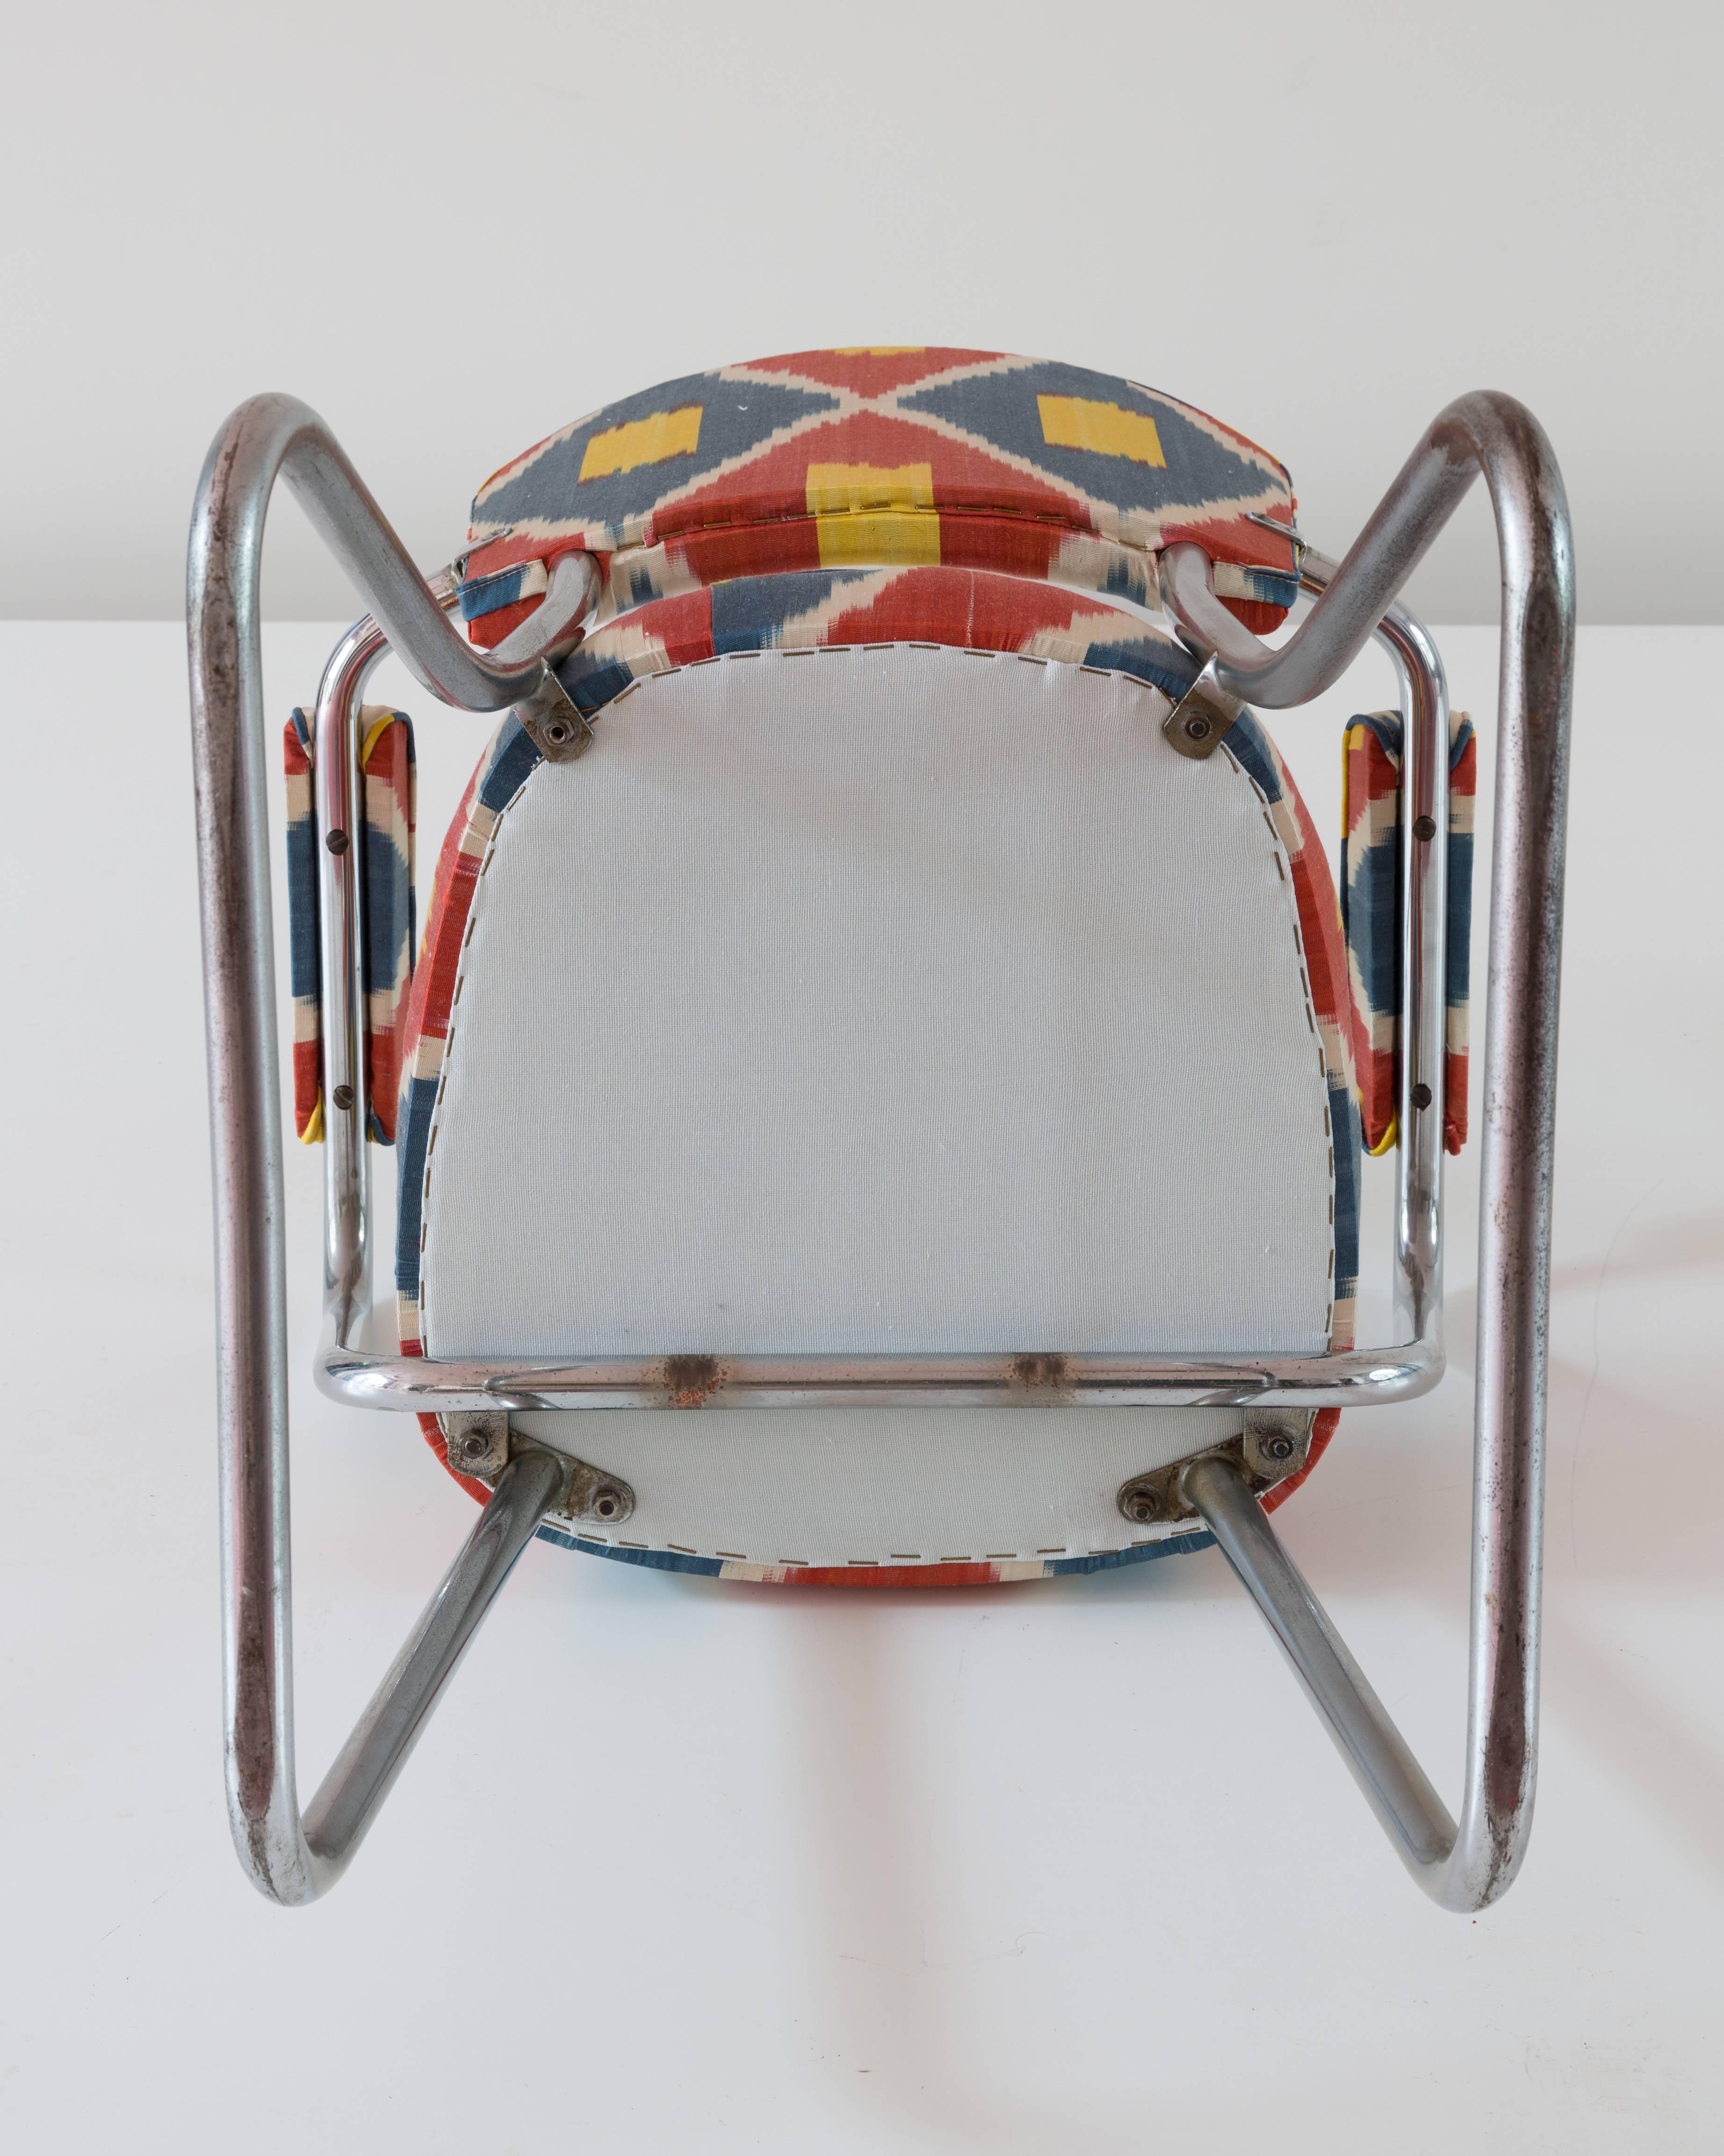 Iconic Gio Ponti Armchair from 